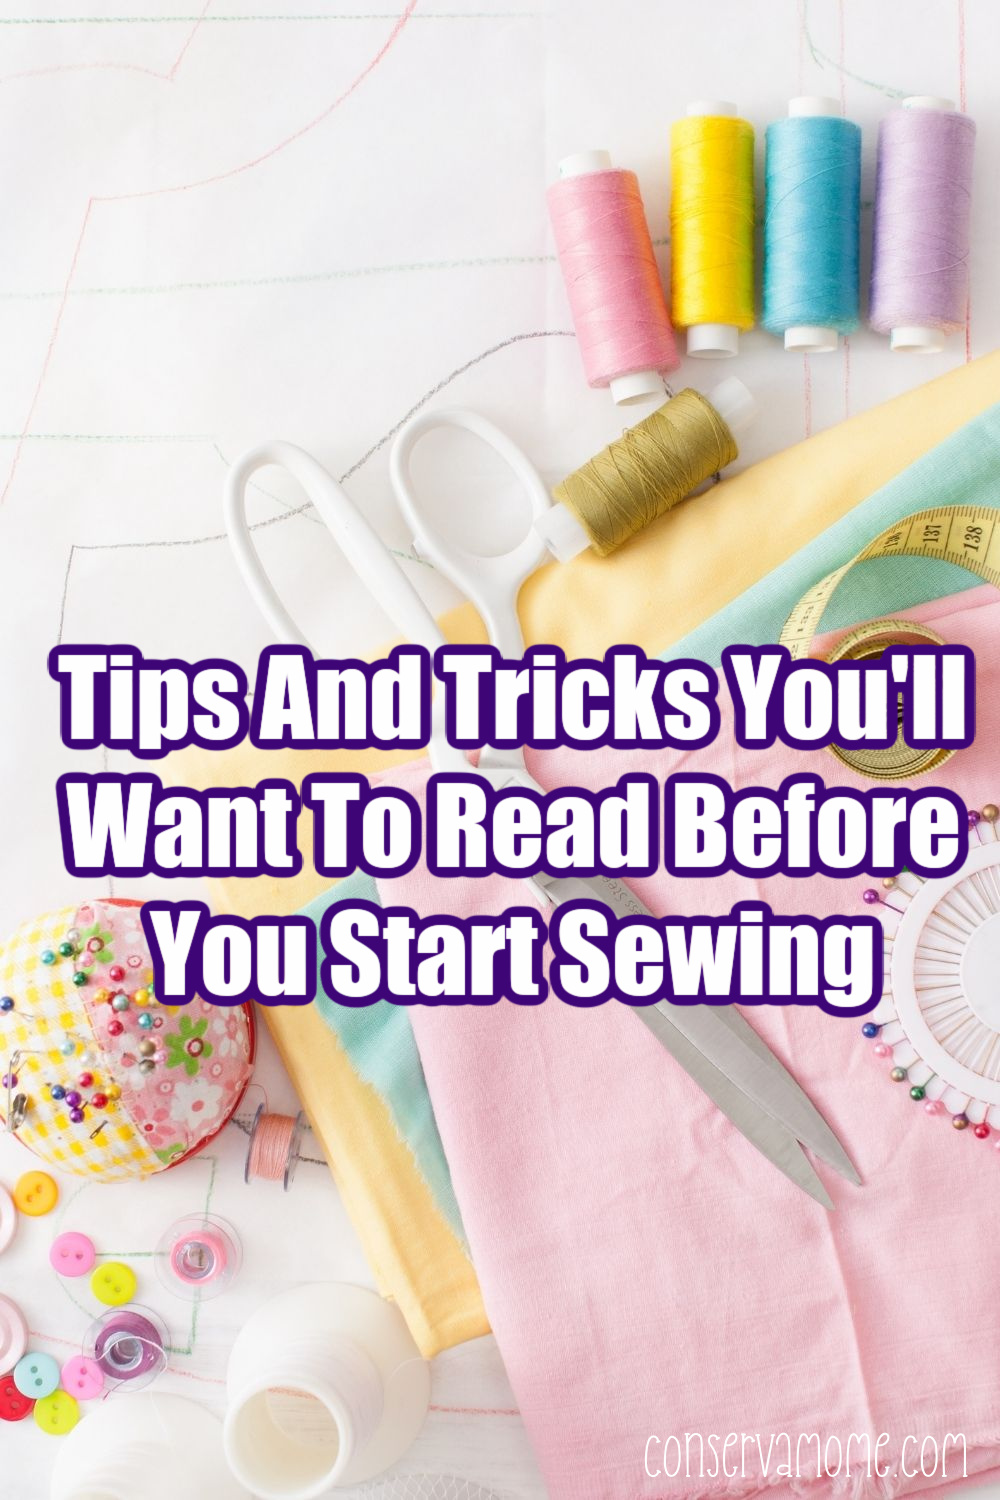 Tips And Tricks You'll Want To Read Before You Start Sewing